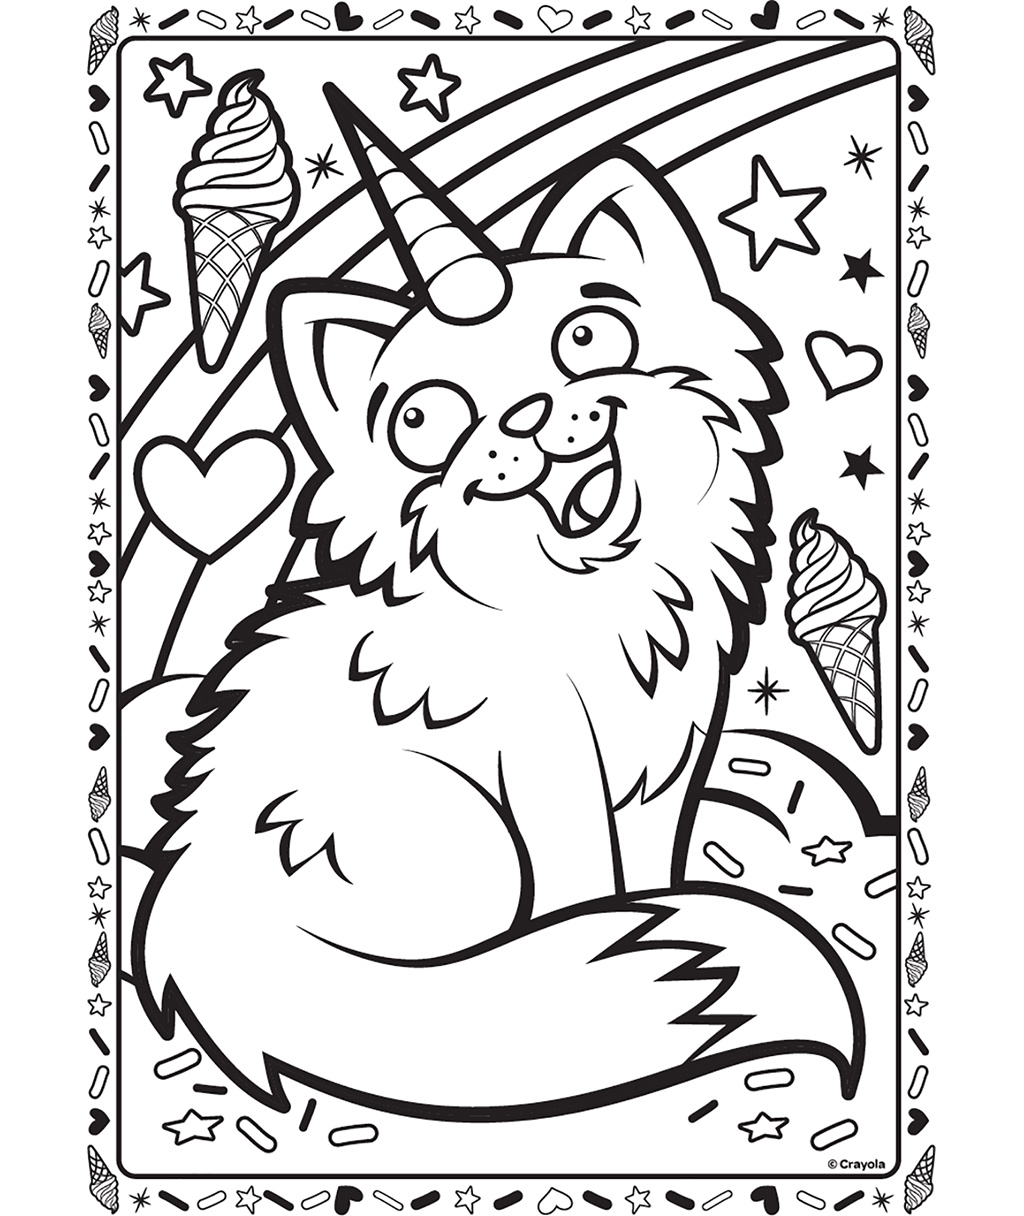 unikitty-coloring-pages-at-getdrawings-free-download